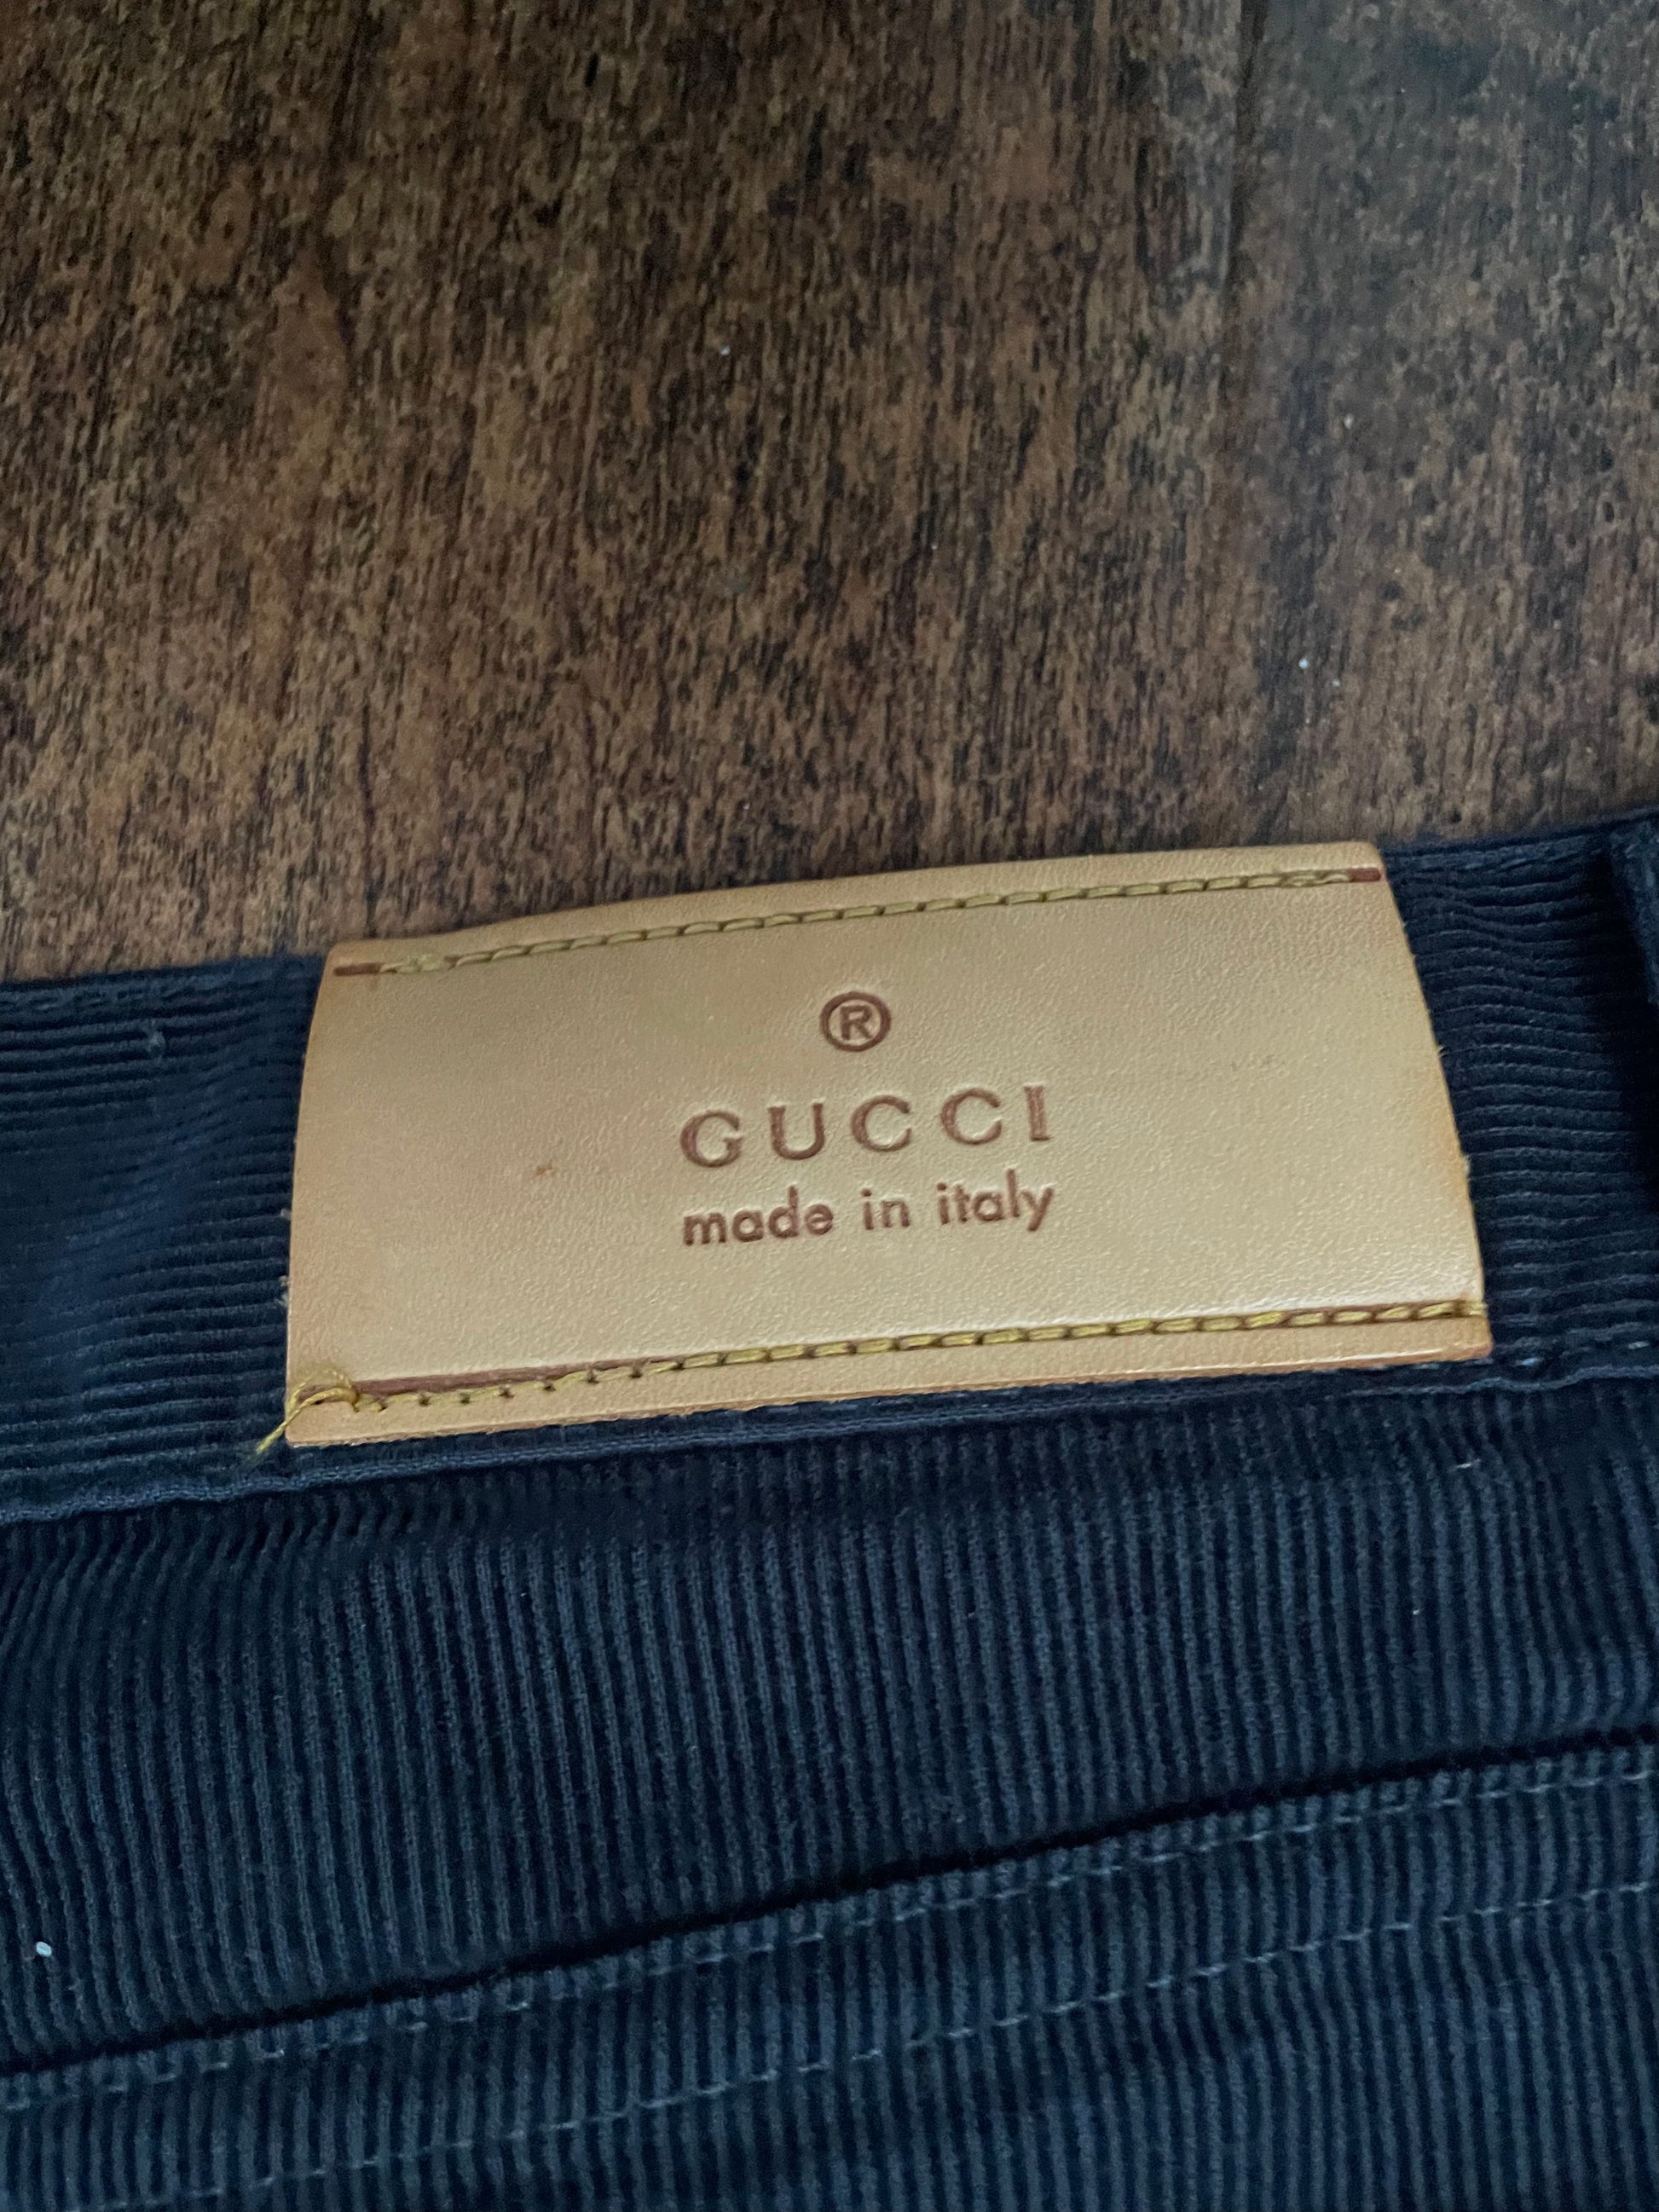 Vintage Gucci Made in Italy Corduroy Pants! Size 50 (EU) – Radical